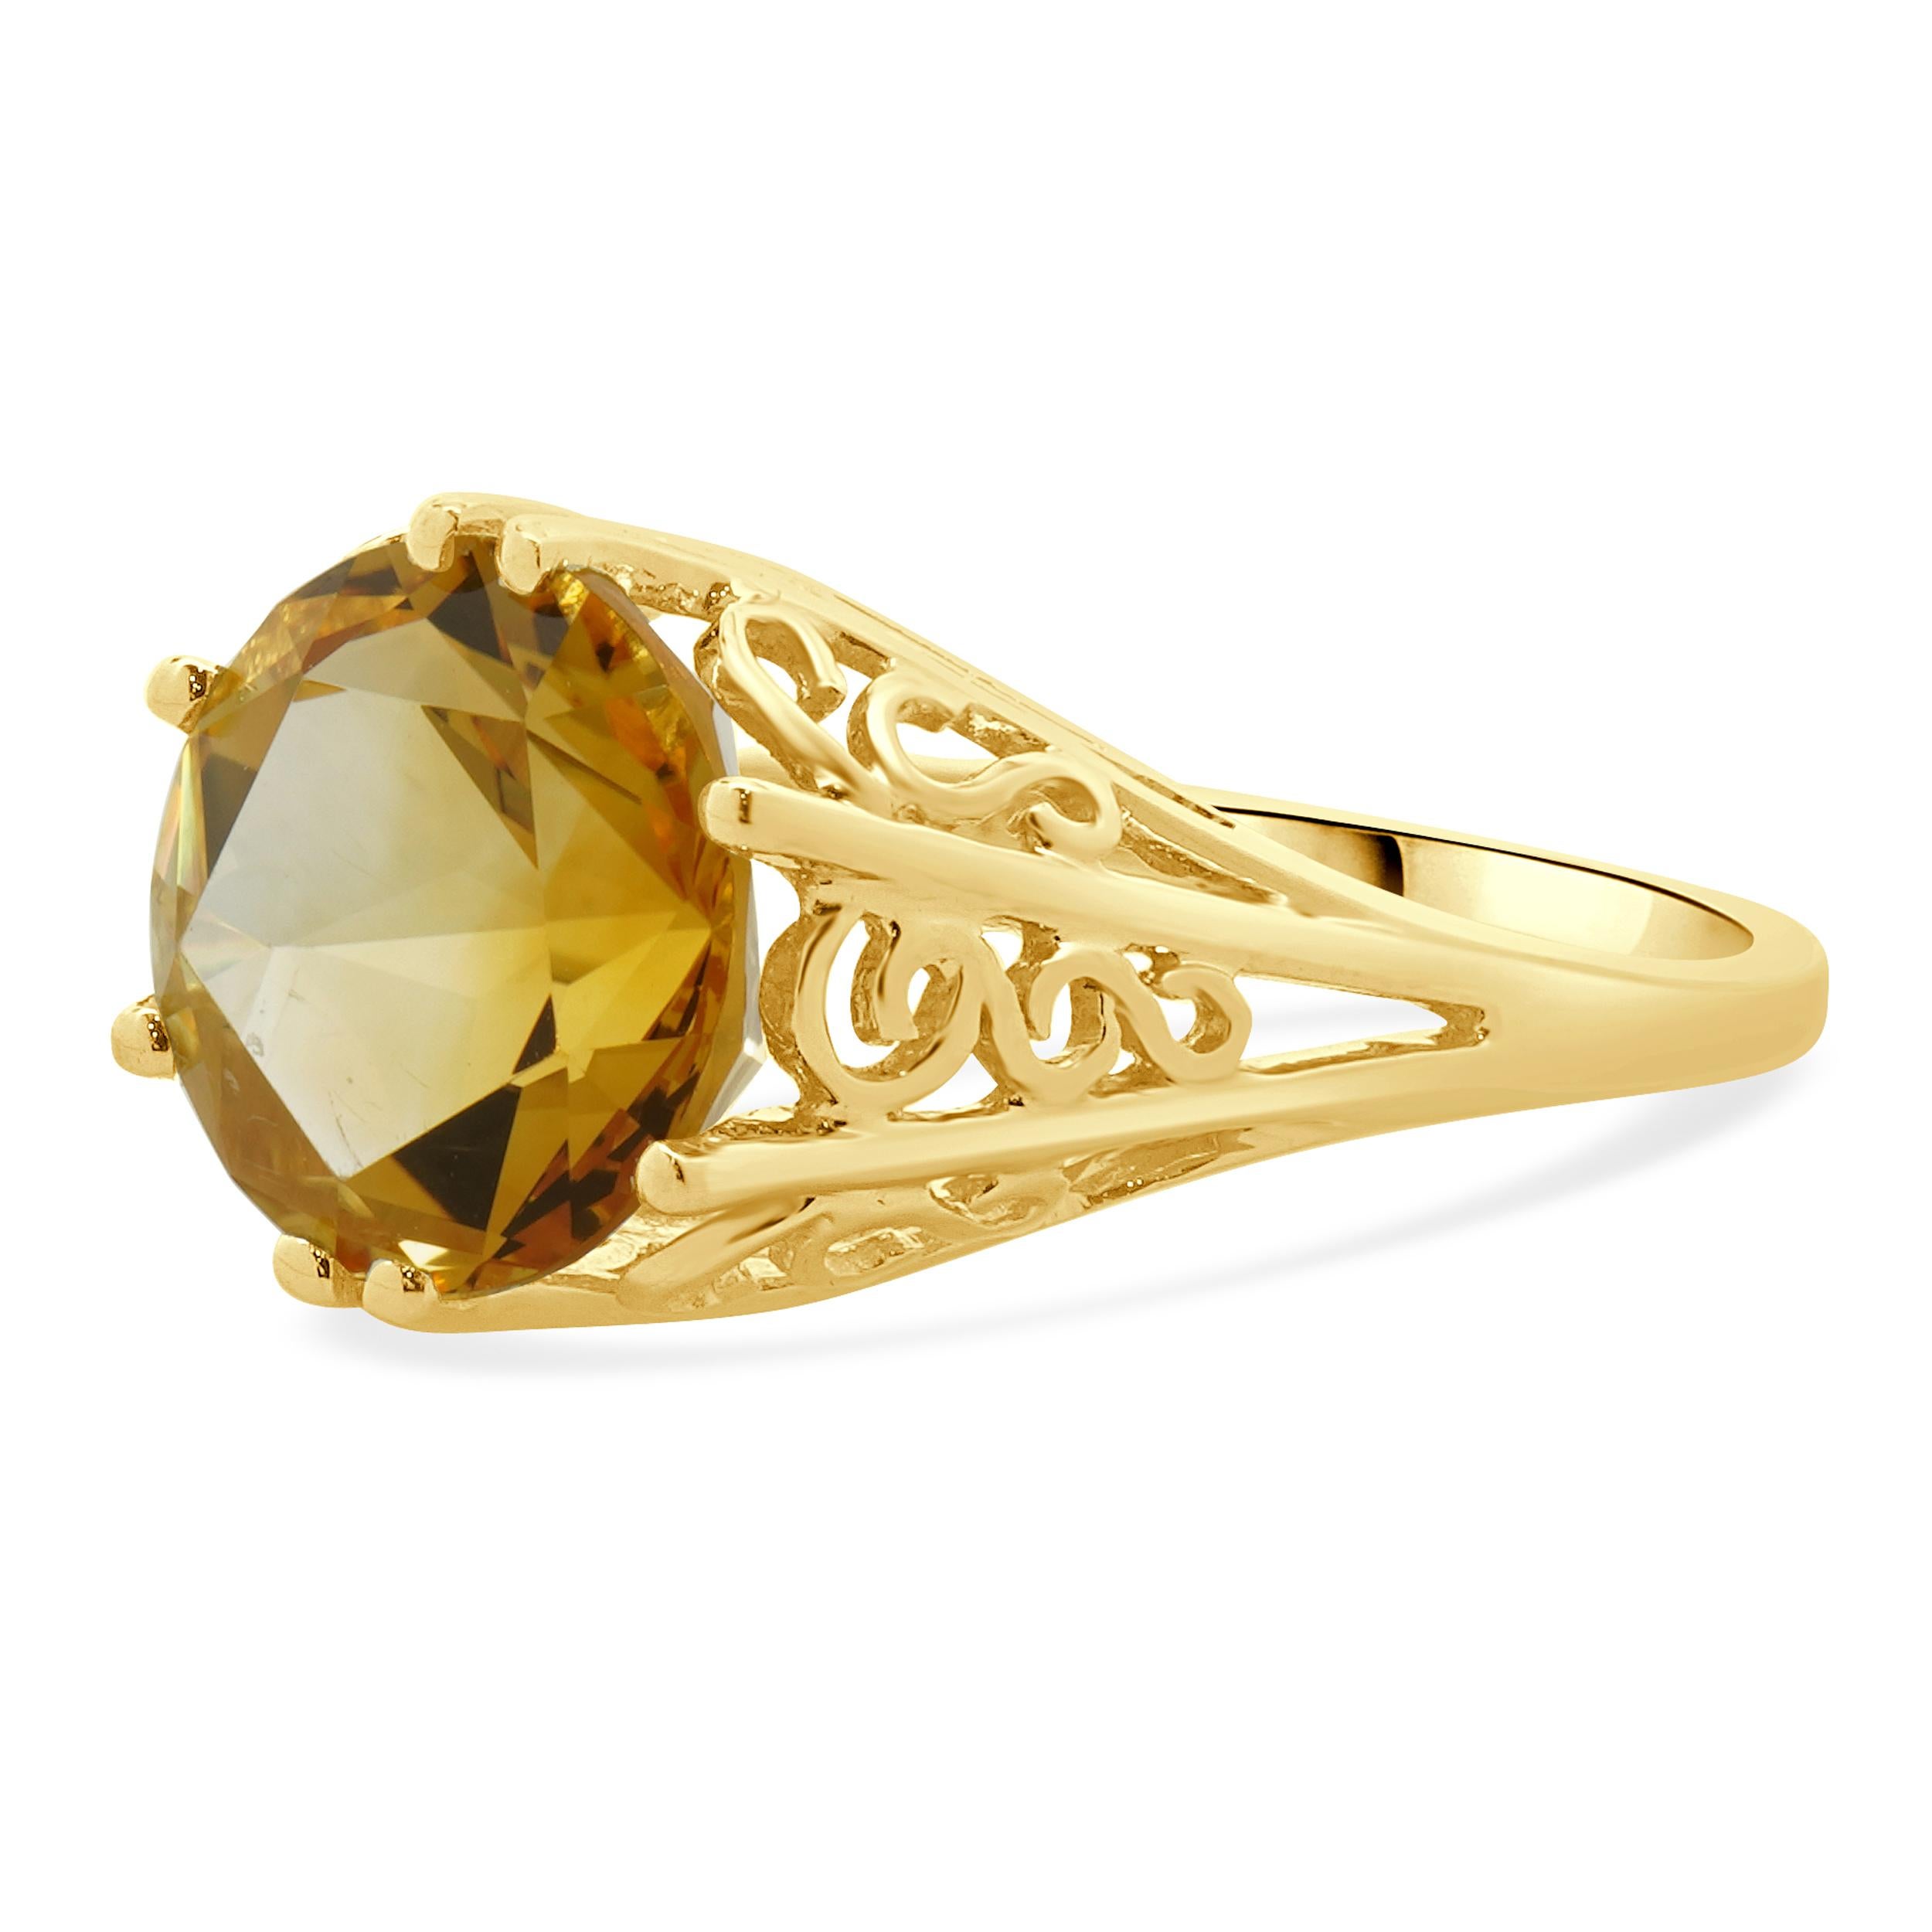 Material: 14K yellow gold
Citrine: 1 round cut = 3.71ct
Ring Size: 7 (please allow up to 2 additional business days for sizing requests)
Dimensions: ring top measures 11mm
Weight: 3.33 grams
